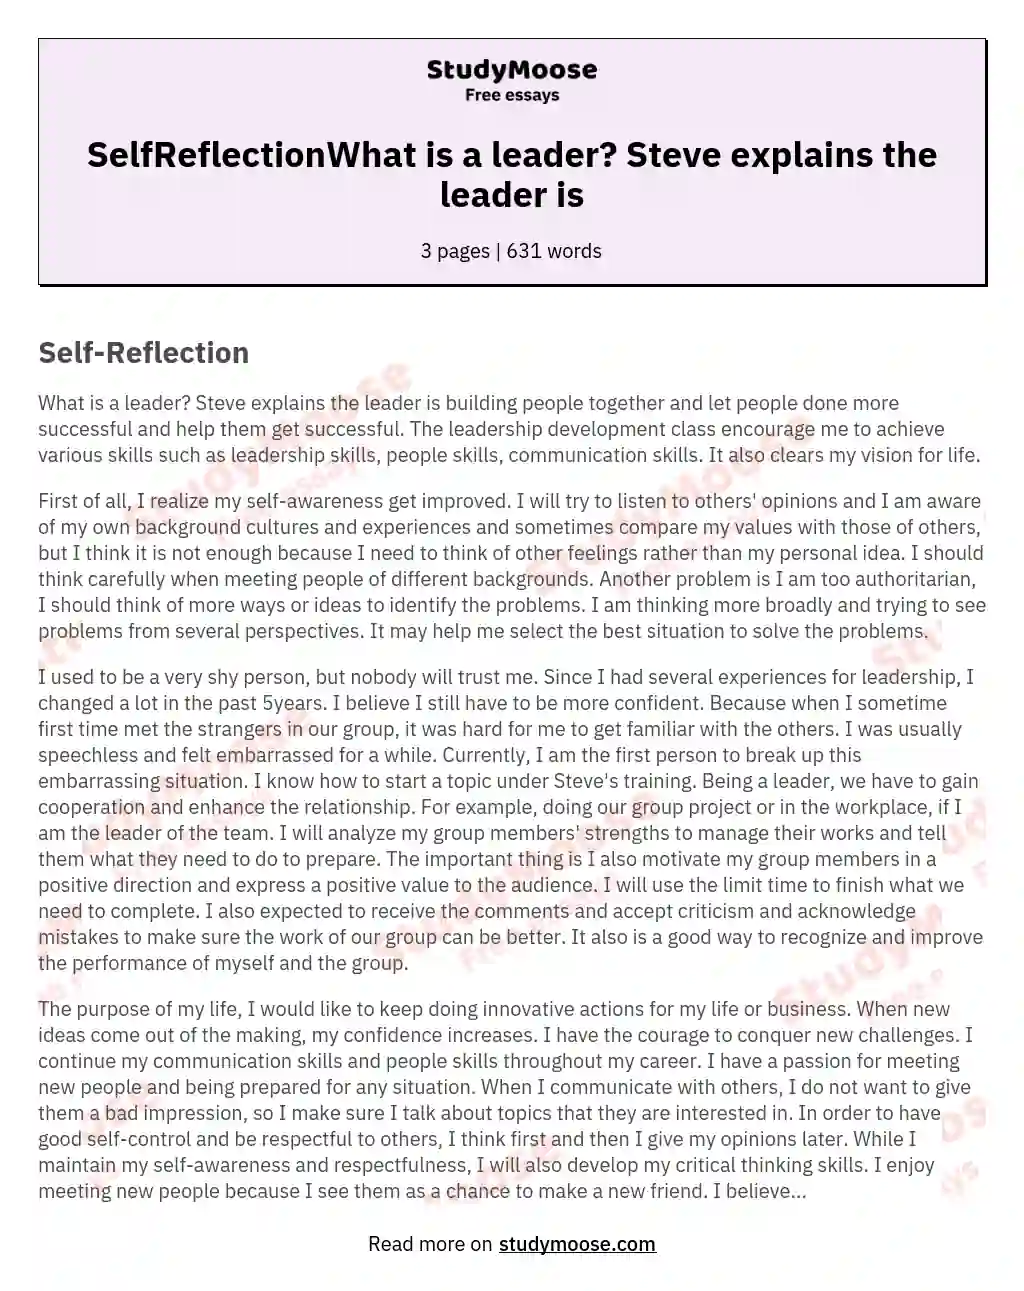 SelfReflectionWhat is a leader? Steve explains the leader is